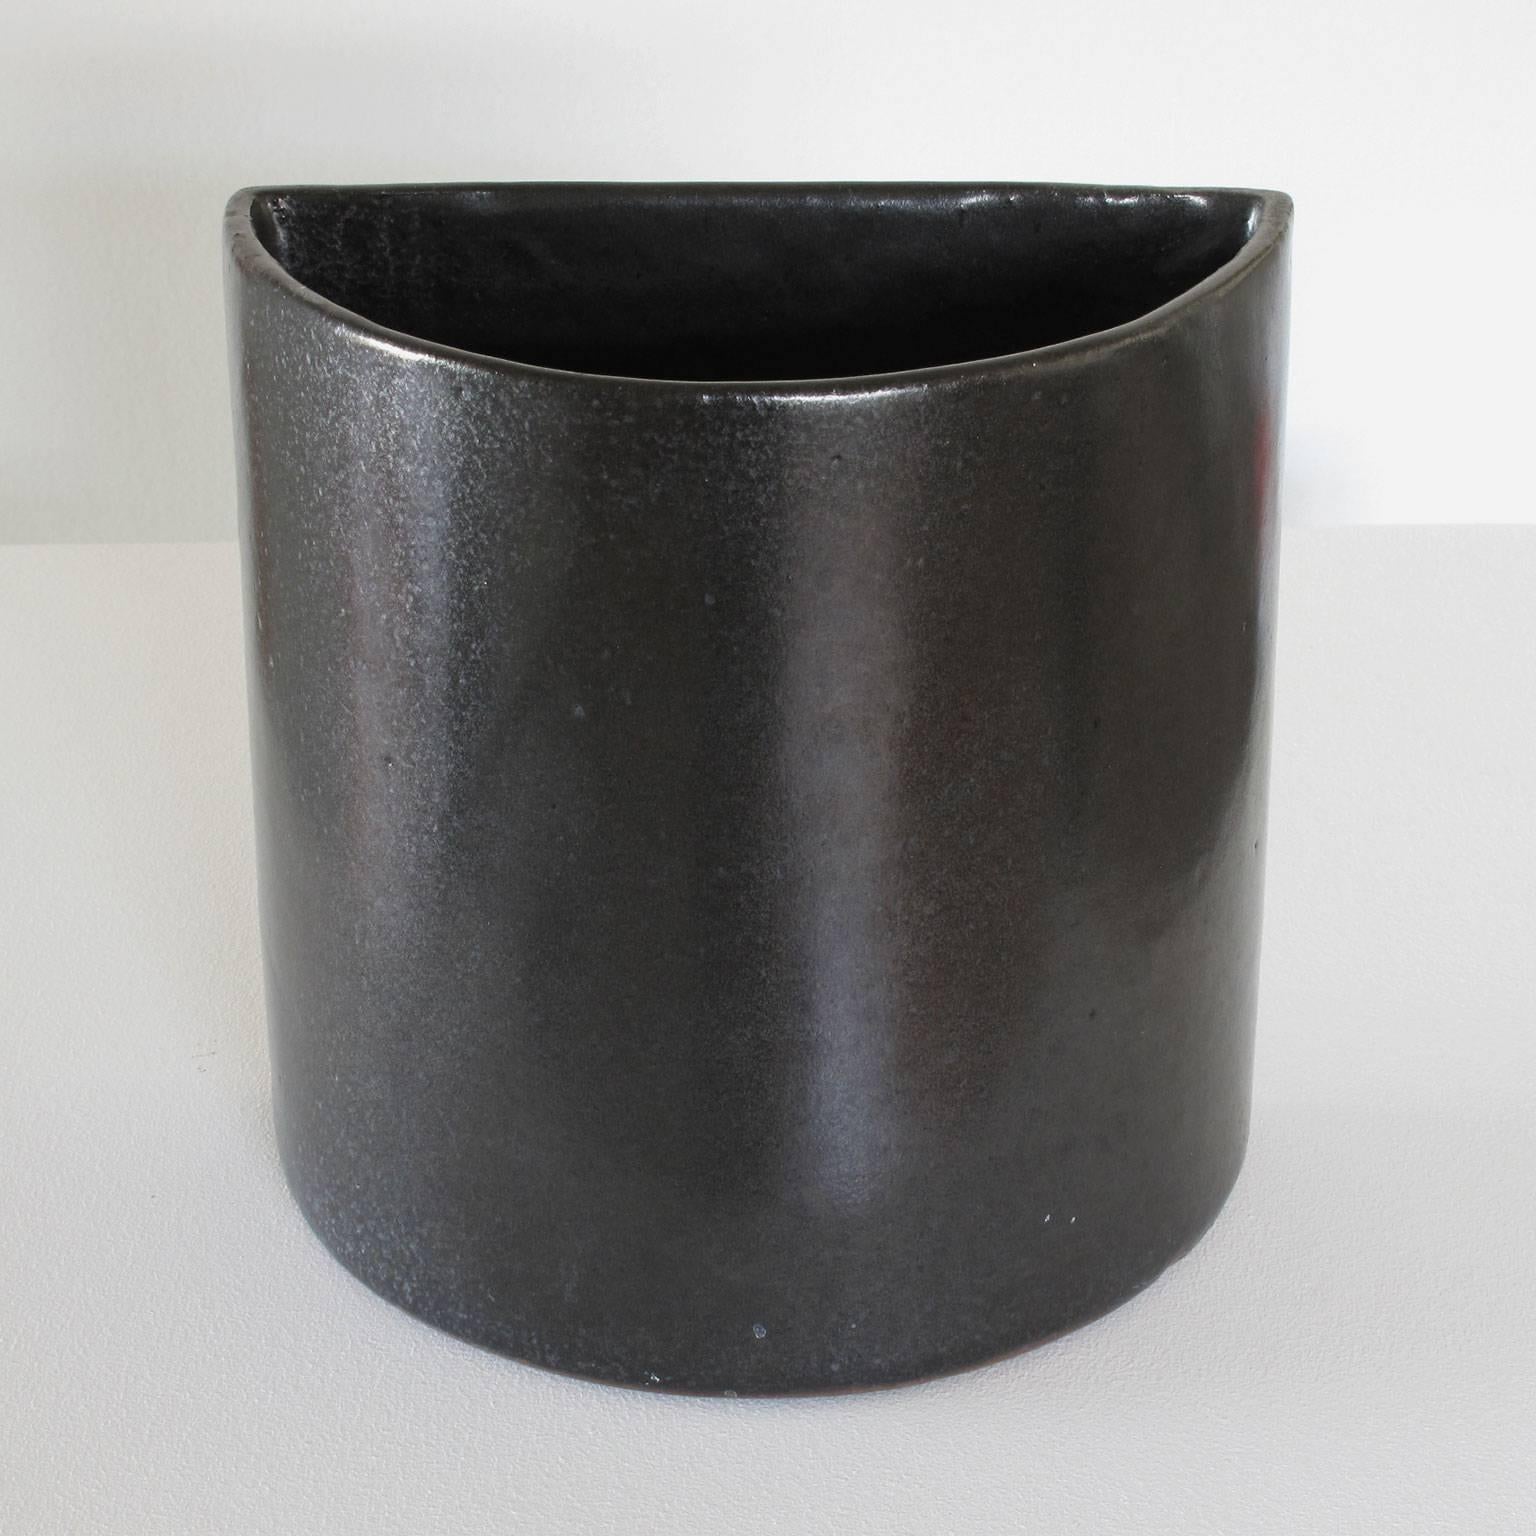 David Cressey 'wall pocket' ceramic planter with flat back to be mounted flush onto wall, stoneware, glazed black, 1960s, Pro Artisan Collection, Architectural Pottery, Los Angeles, California, 8 high x 8 wide x 5 deep inches, in excellent vintage